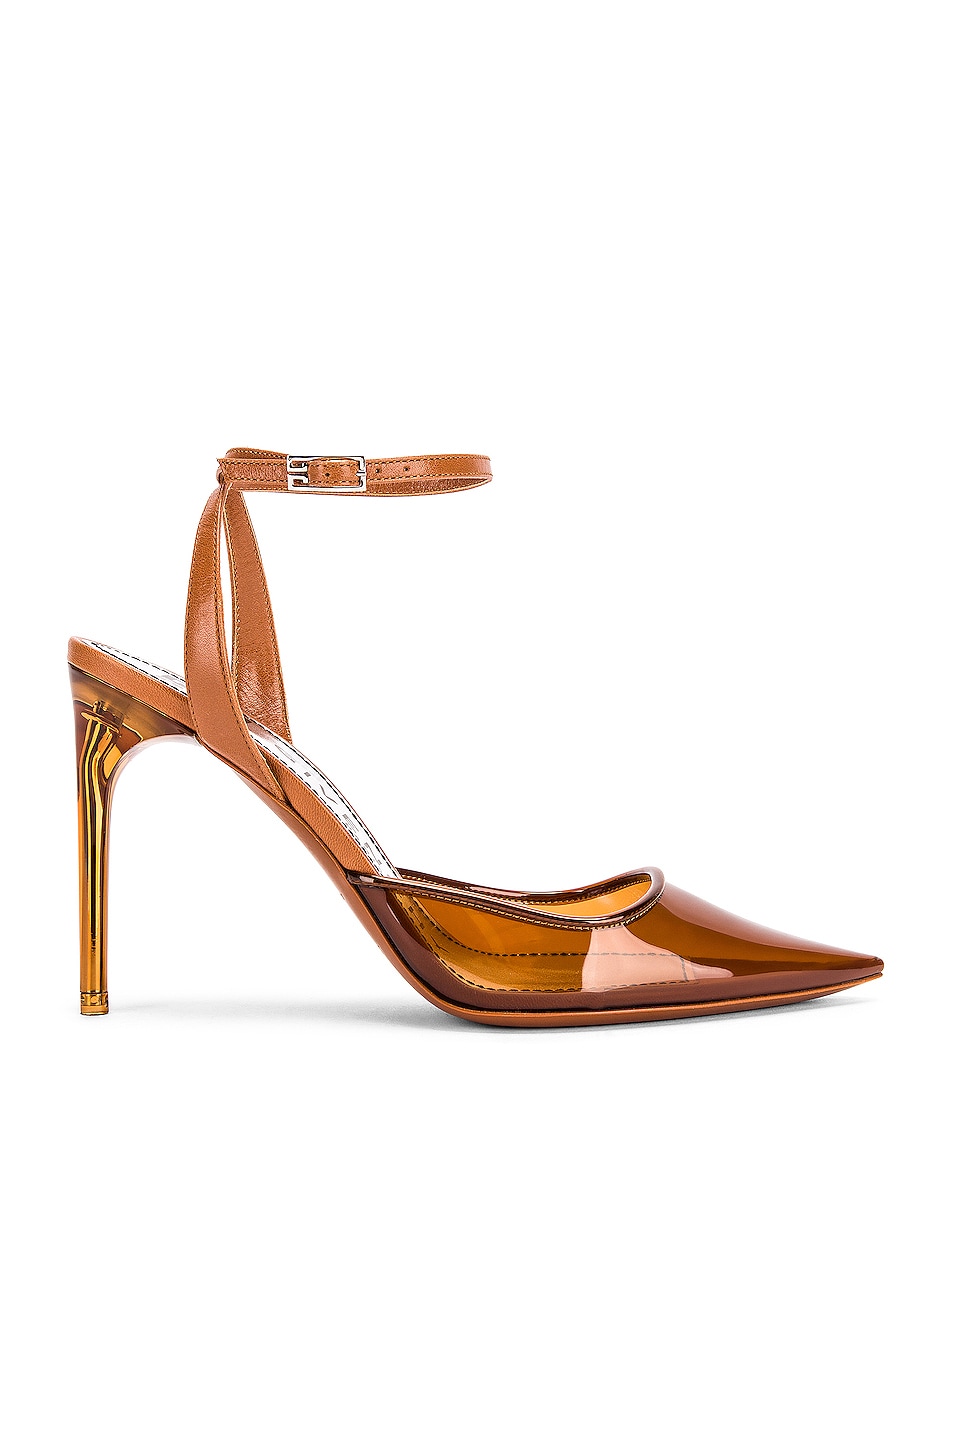 Image 1 of Givenchy Couture Stiletto Ankle Strap Heels in Cognac